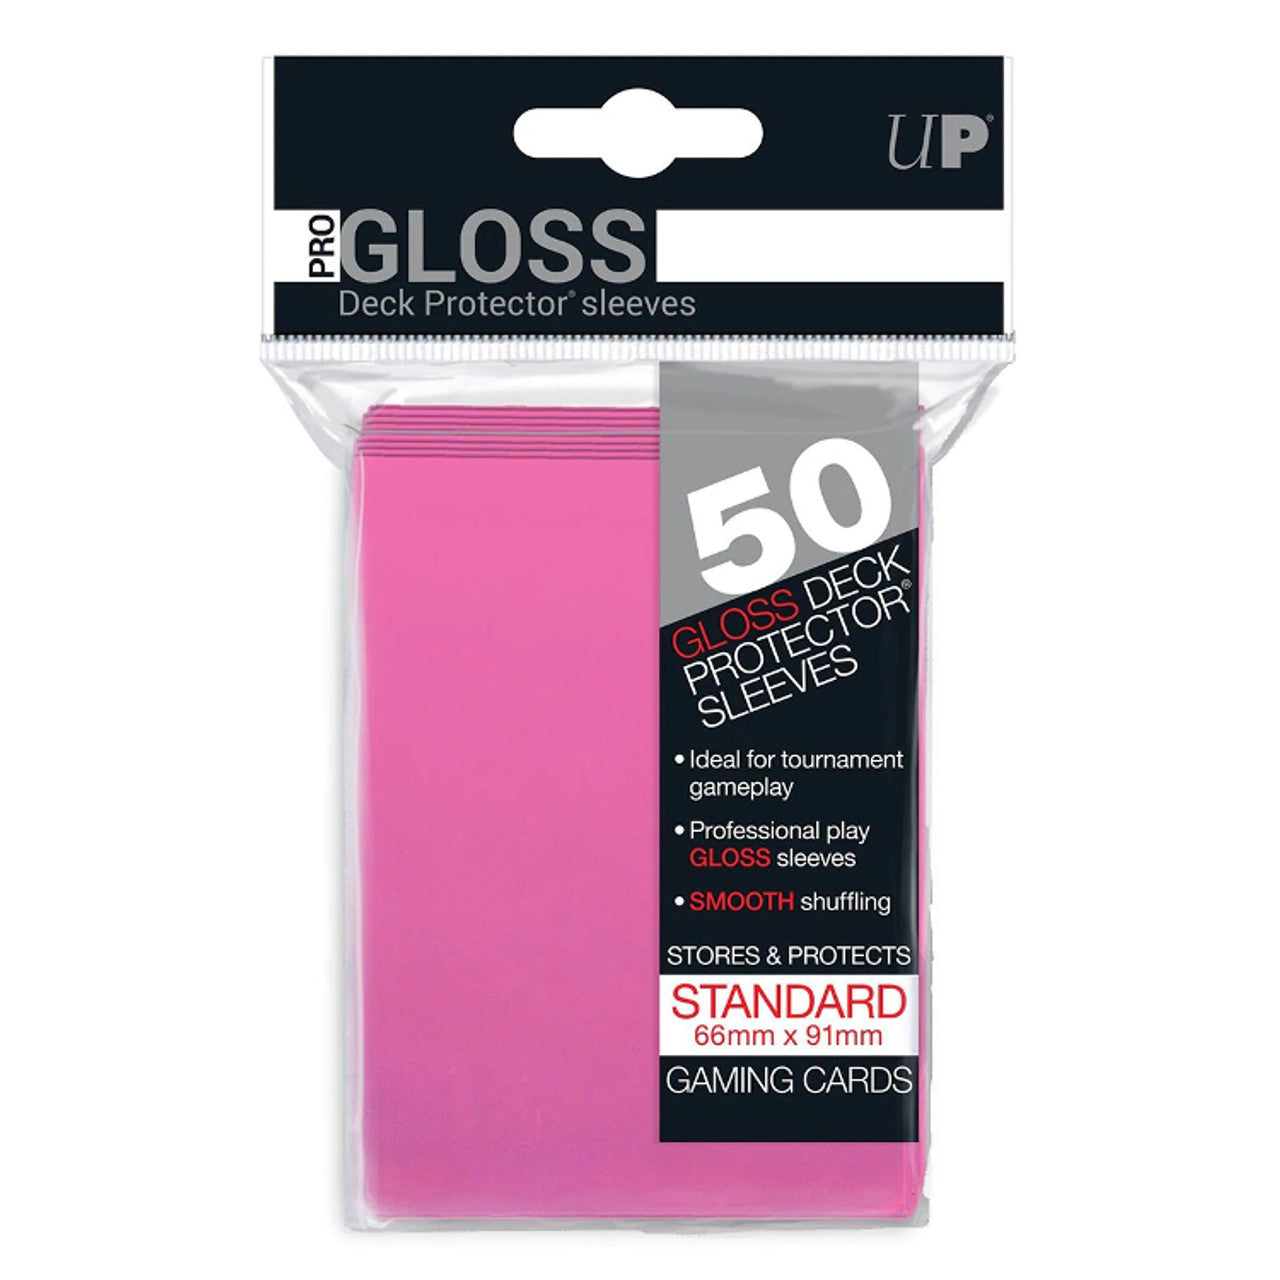 Ultra Pro Gloss Deck Protector Sleeves 50ct Bright Pink